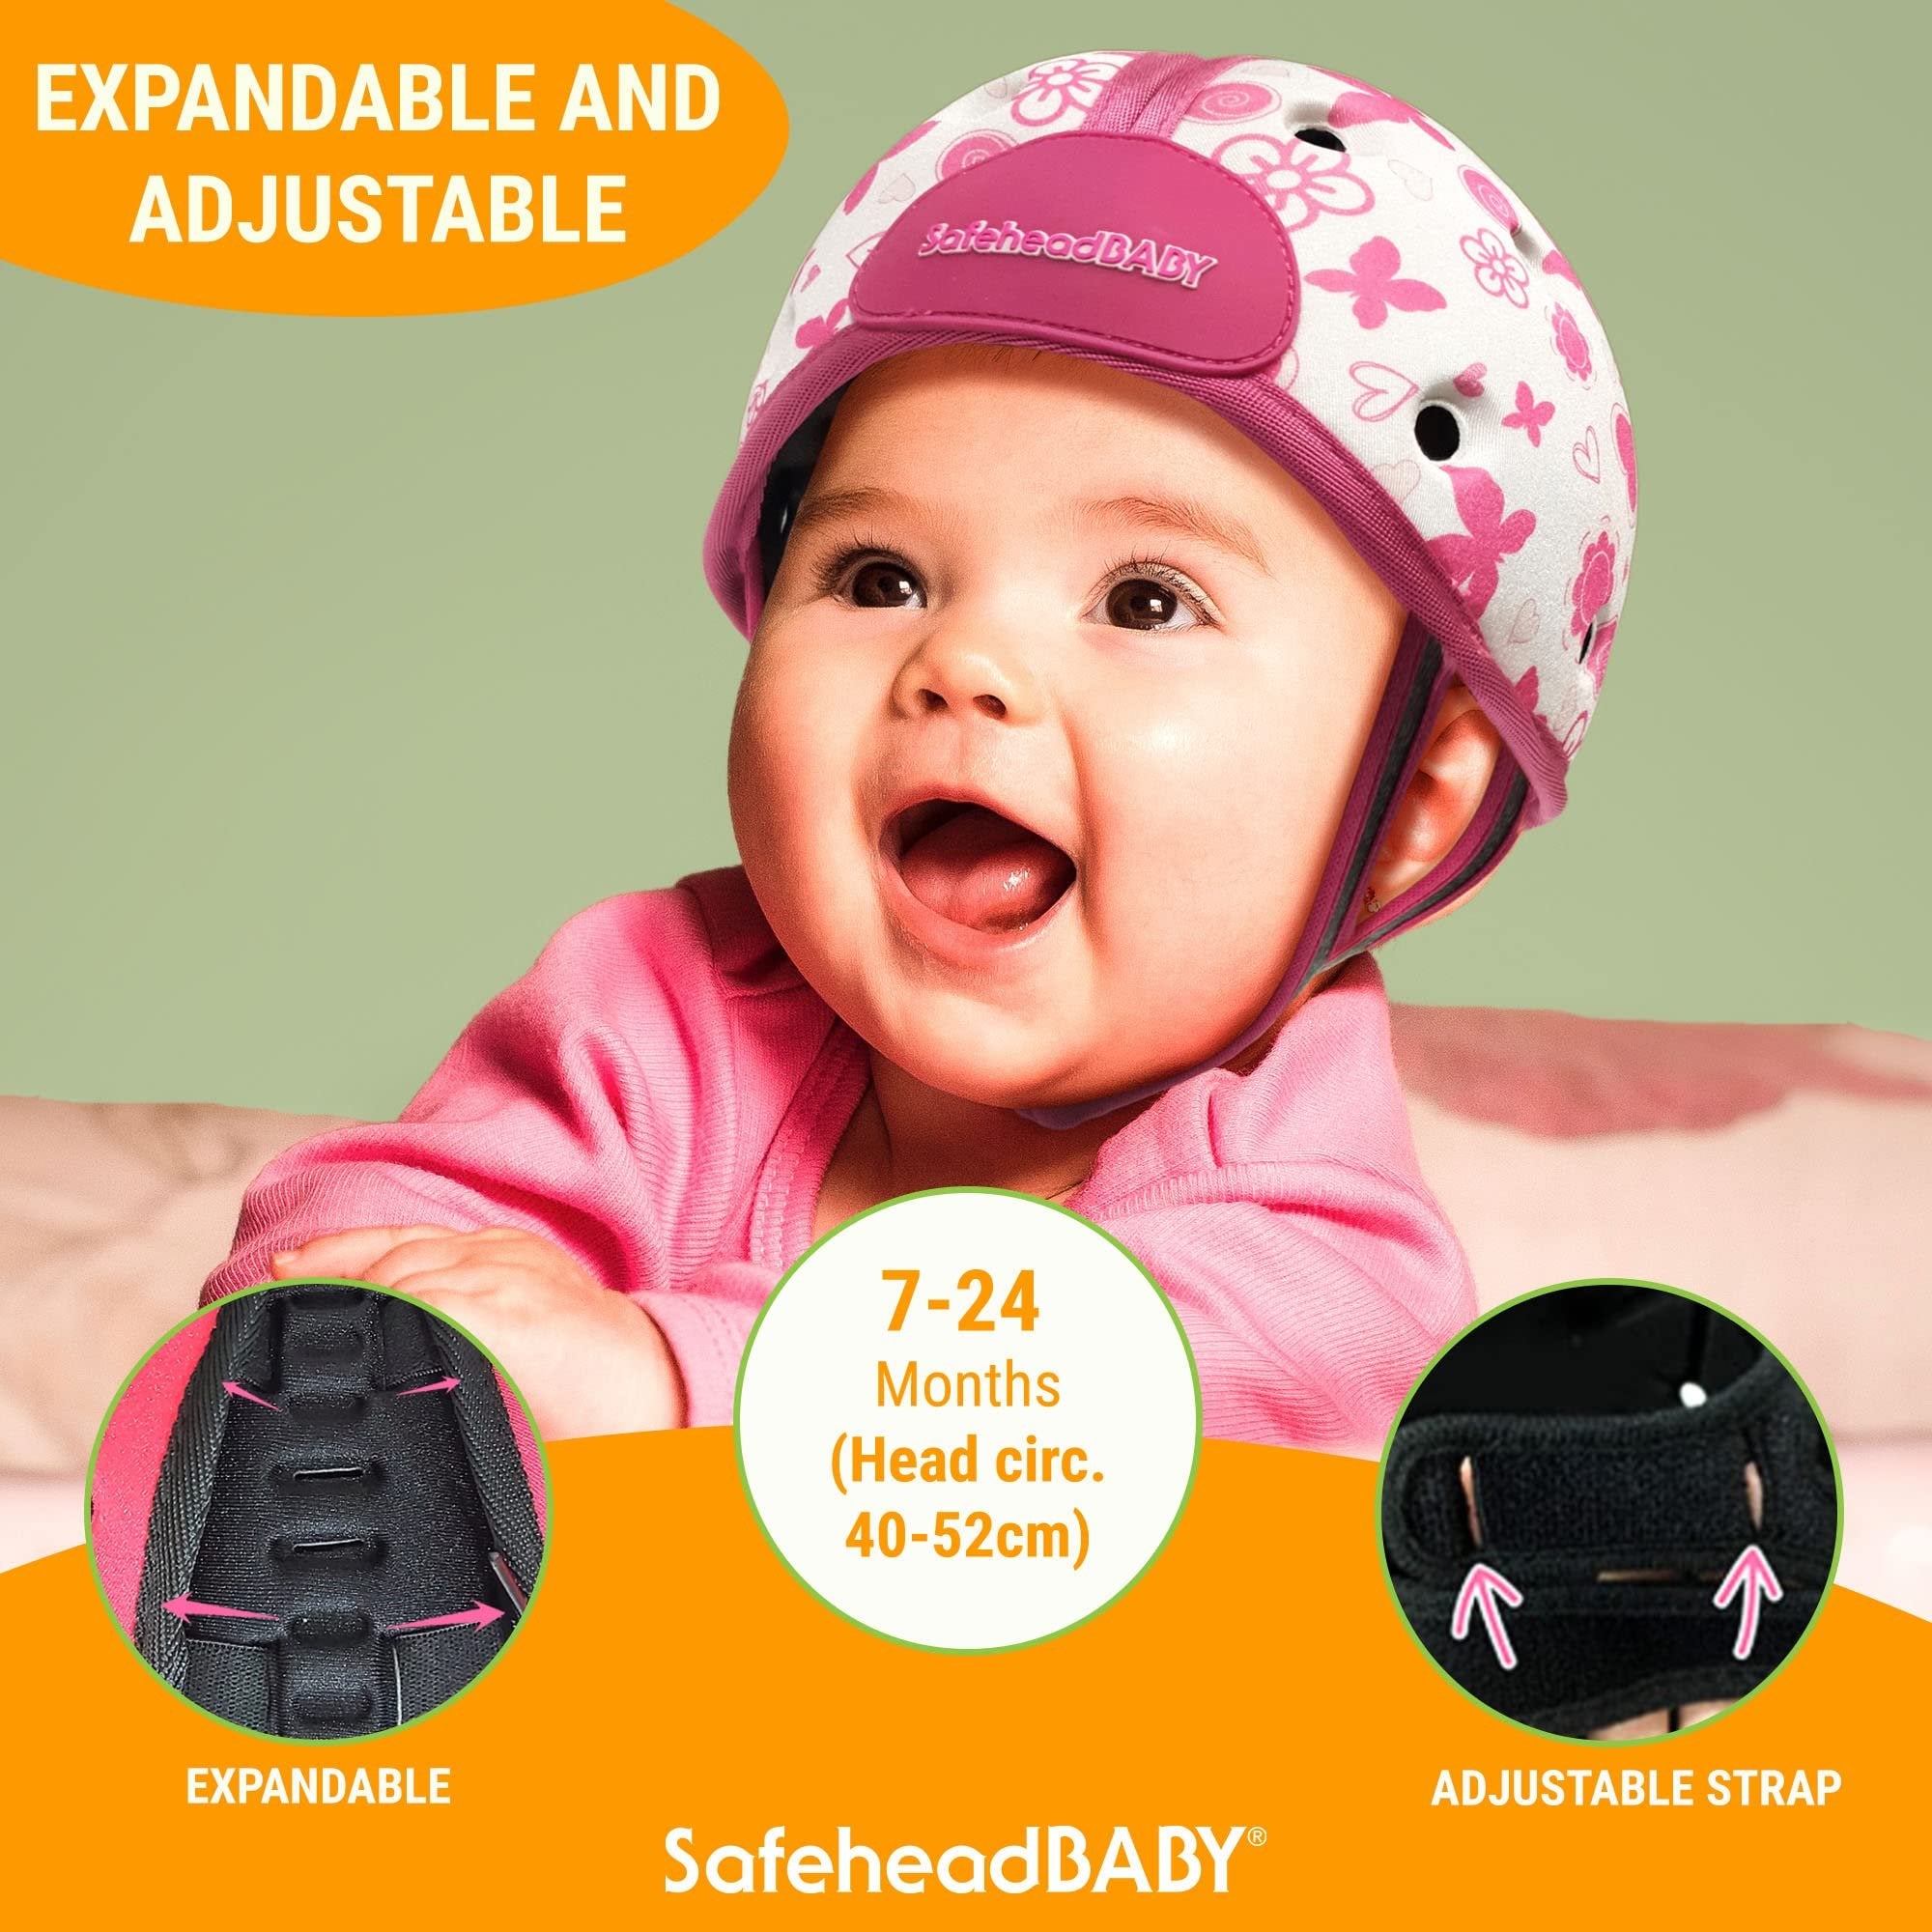 SafeheadBABY Infant Safety Helmet - Red, Expandable & Adjustable, Ultra-Lightweight (1 Pack)